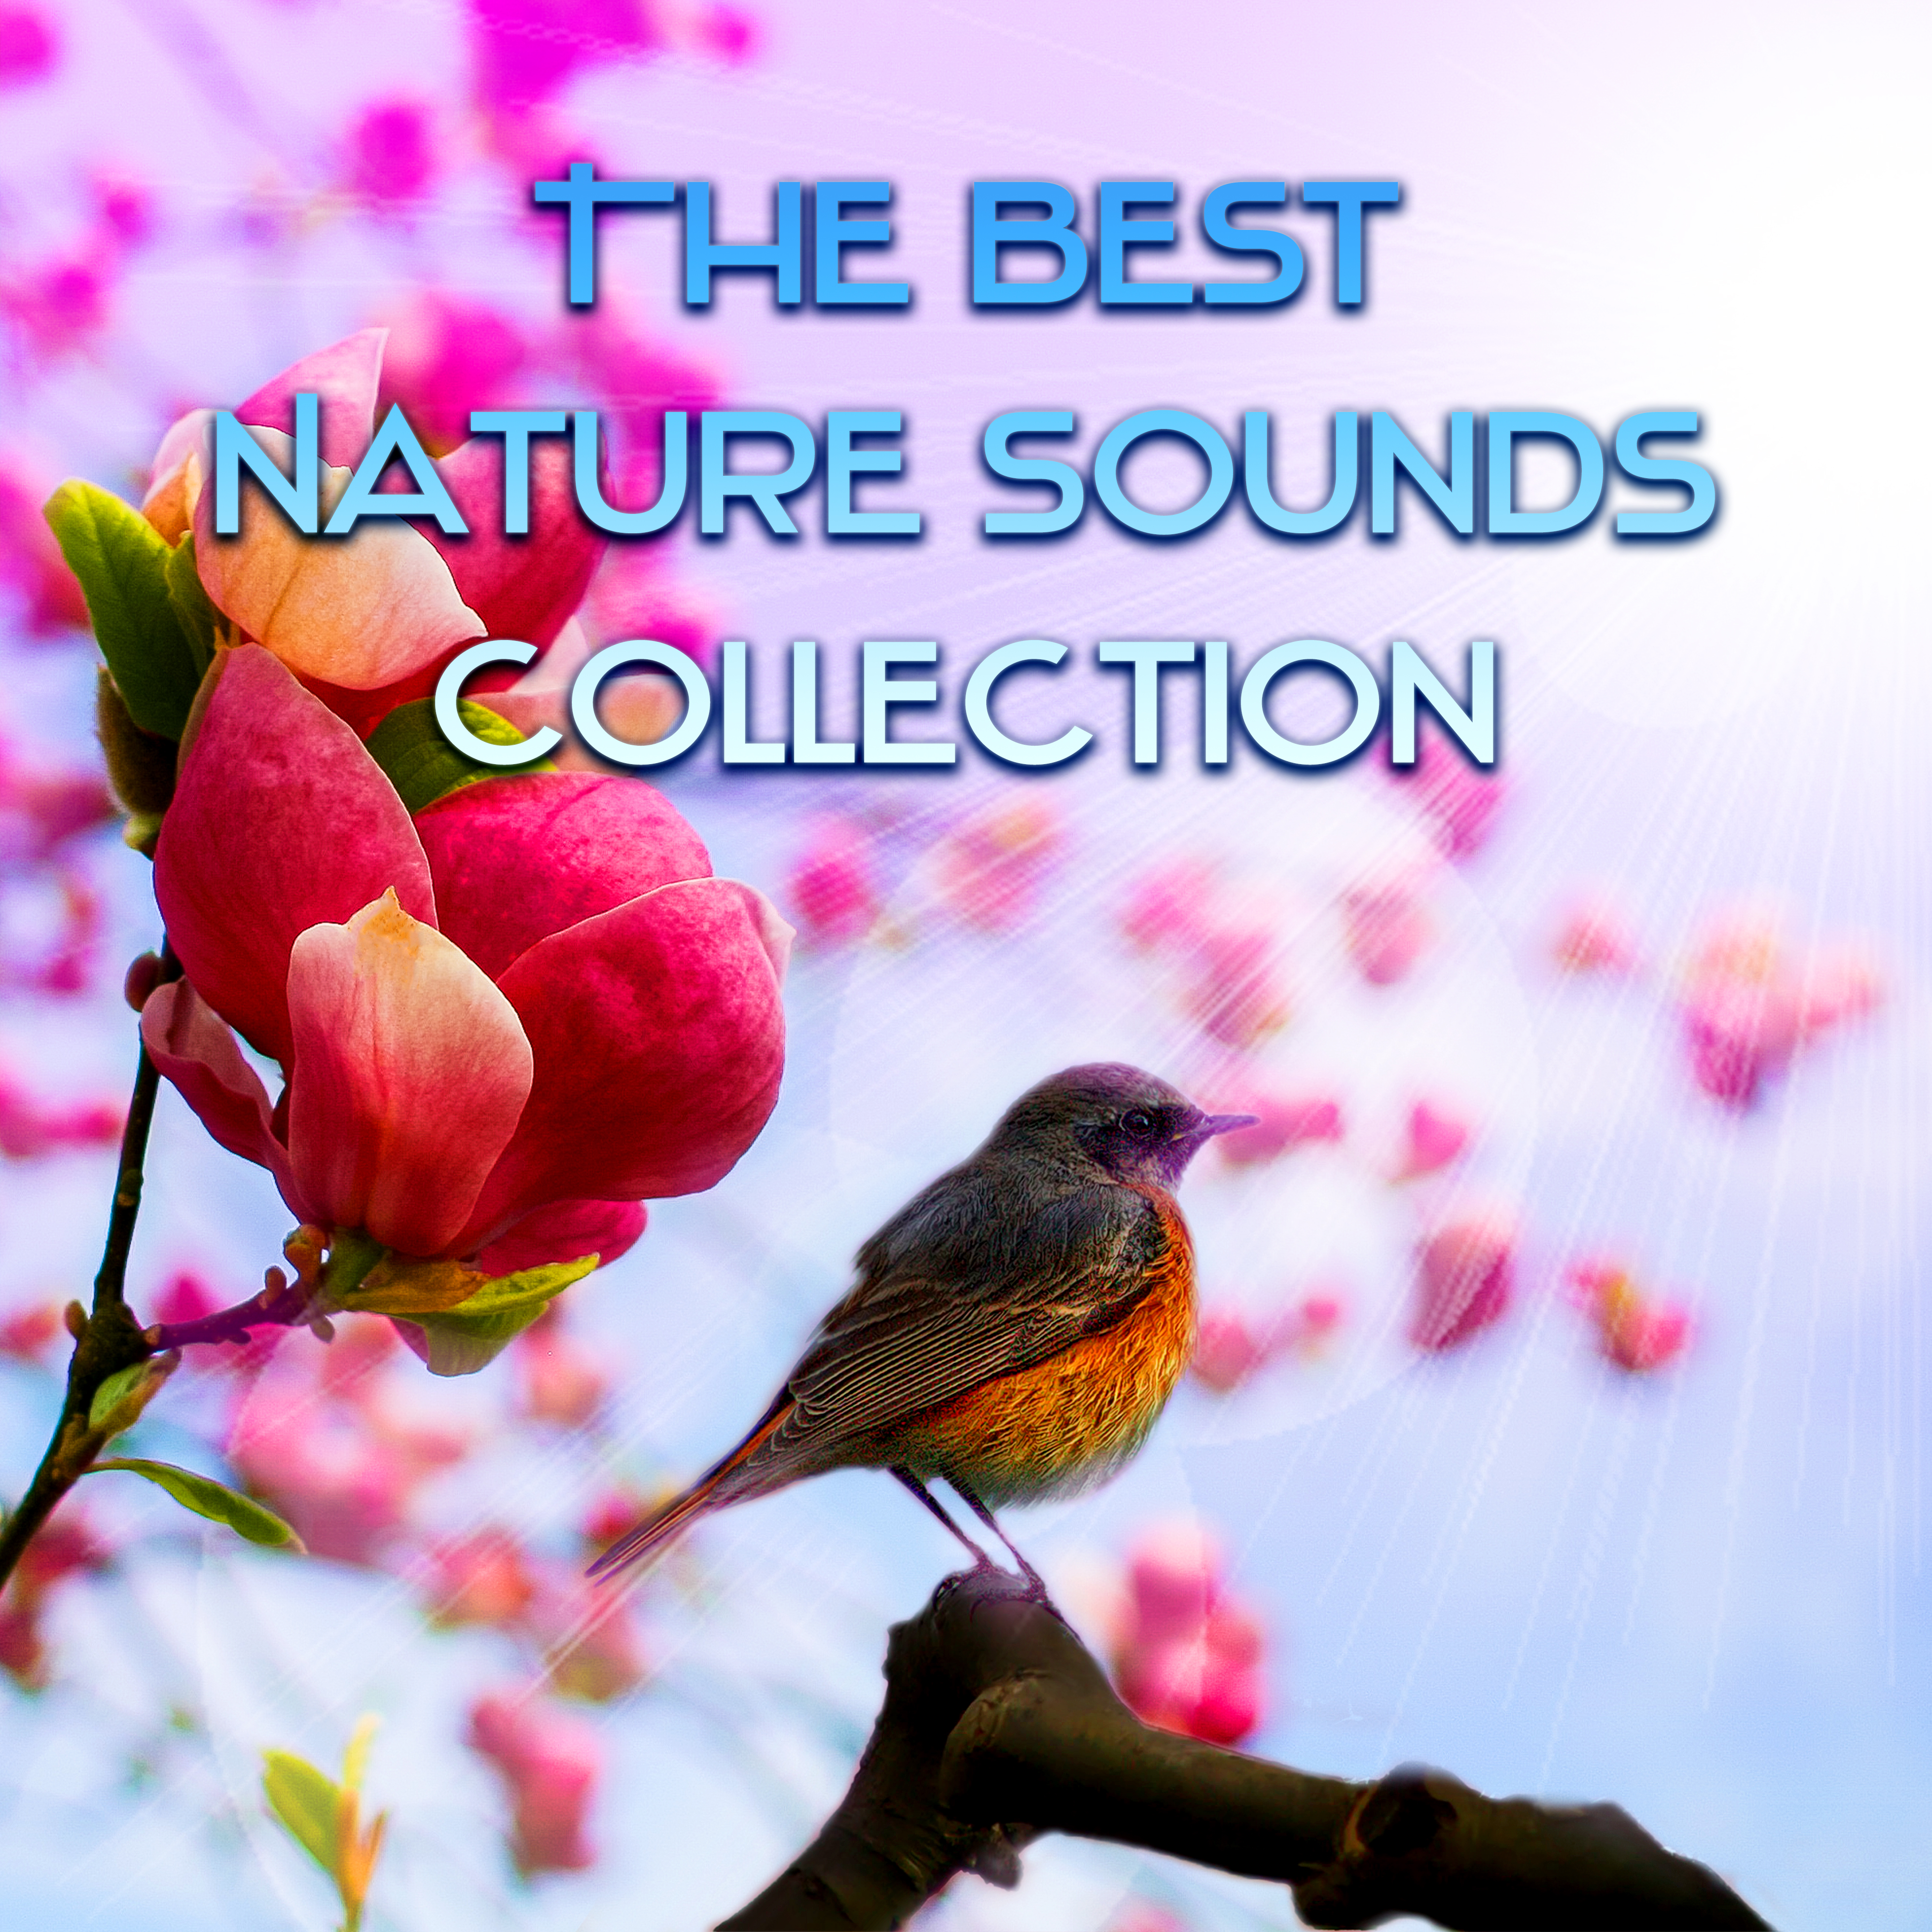 The Best Nature Sounds Collection  Ocean Sounds, Birds for Sleep and Relaxation, Sonidos de la Naturaleza, Sons de la Nature, Water Sounds, Guitar  Piano Music